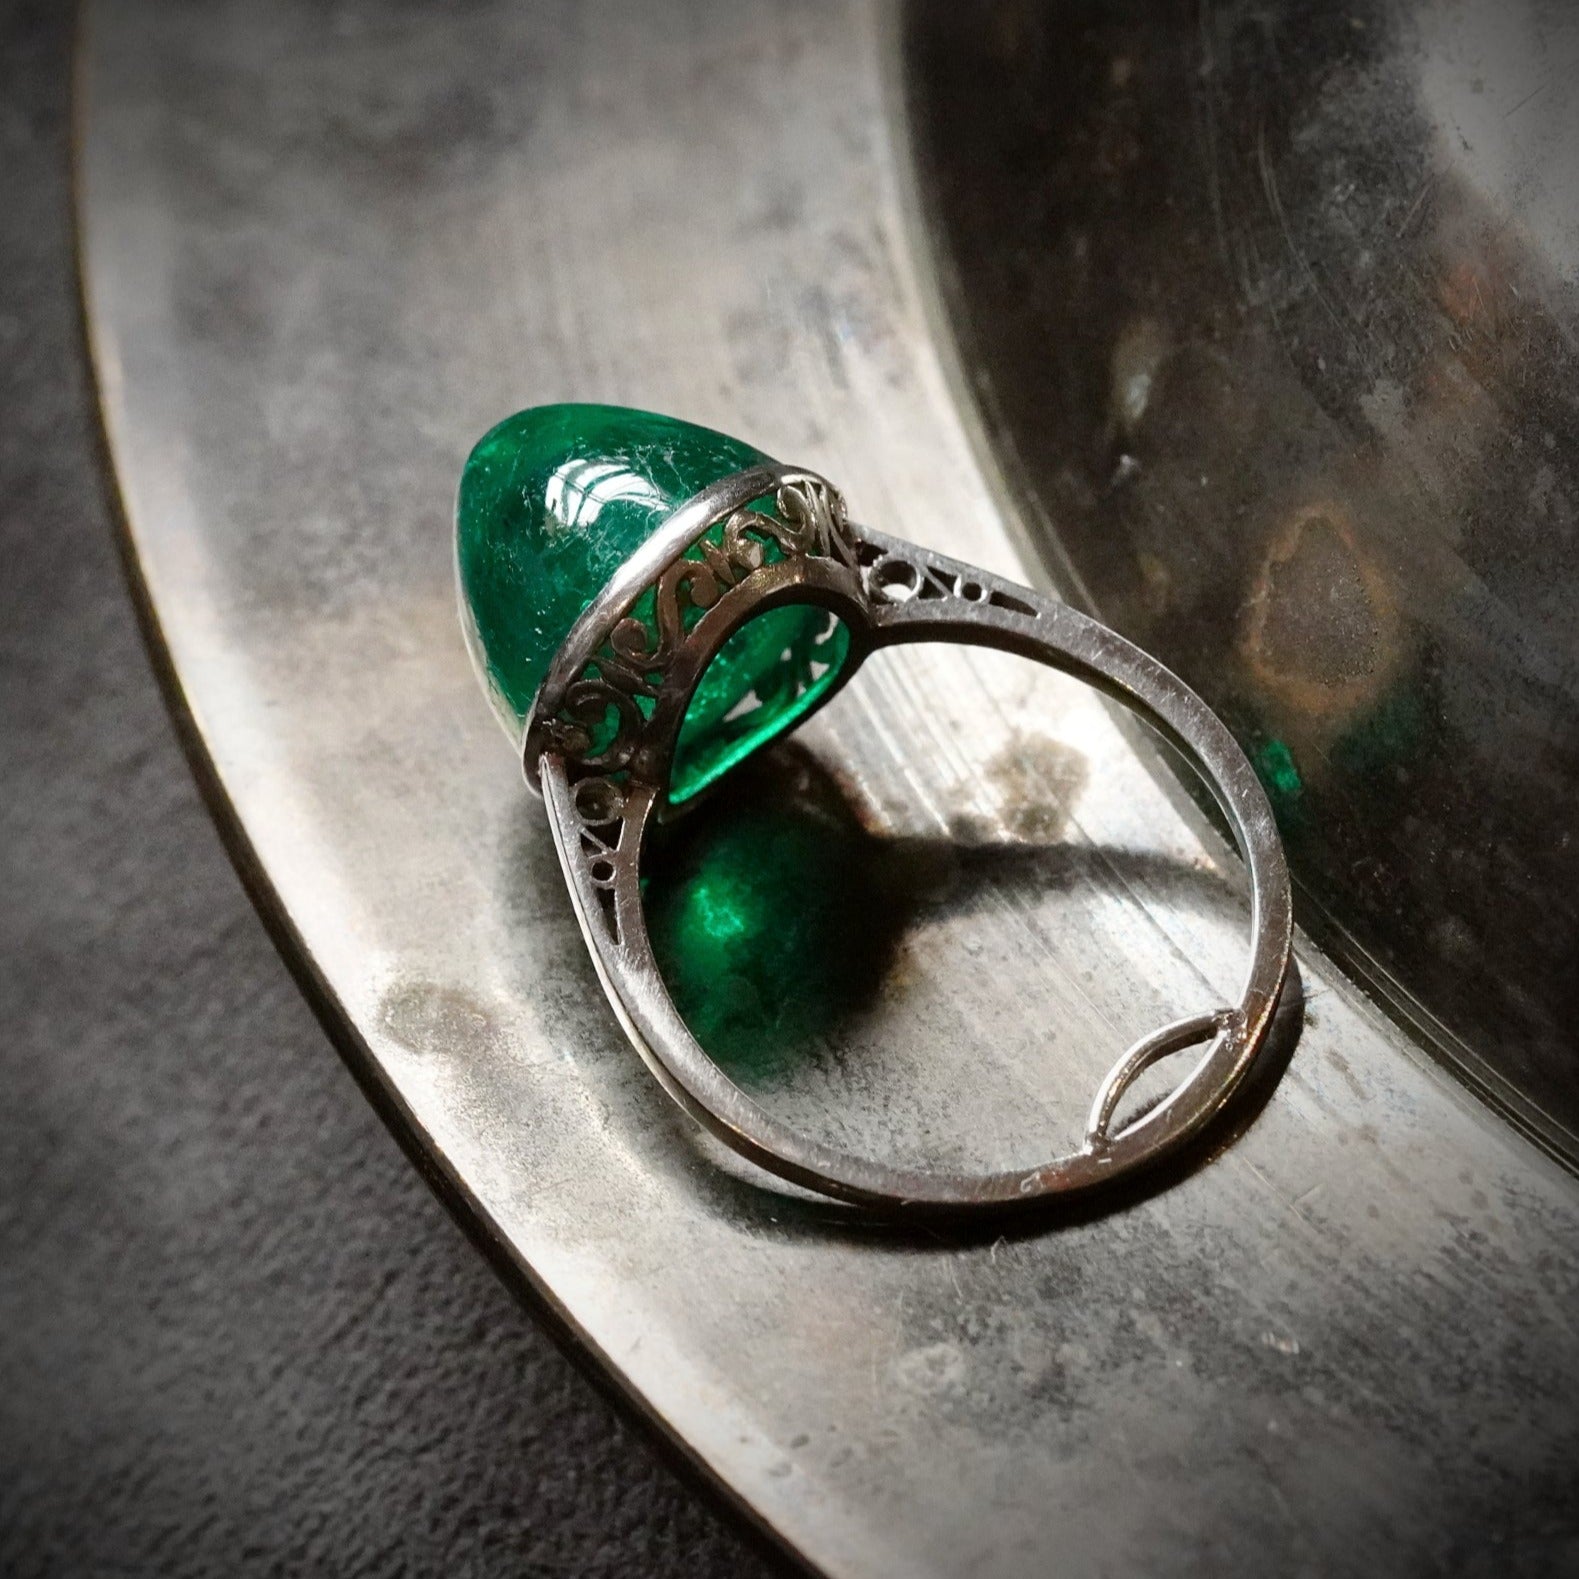 Cabochon Colombian Emerald Ring, 12.00 ct